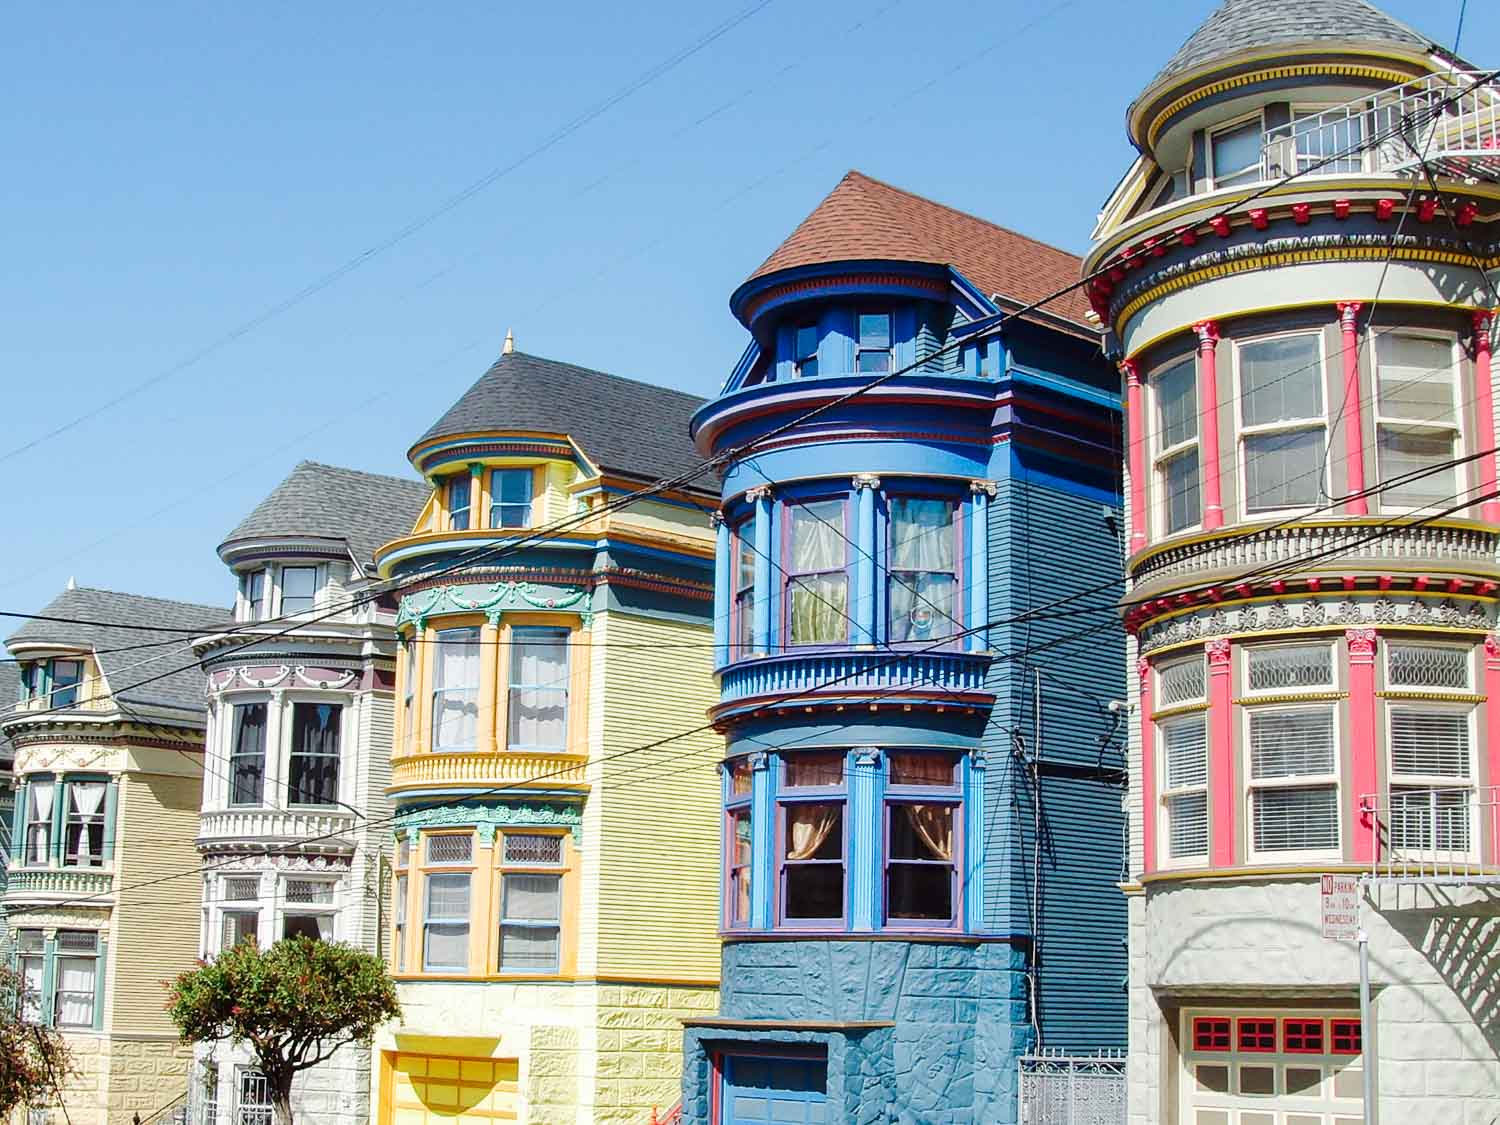 Things to see in San Francisco